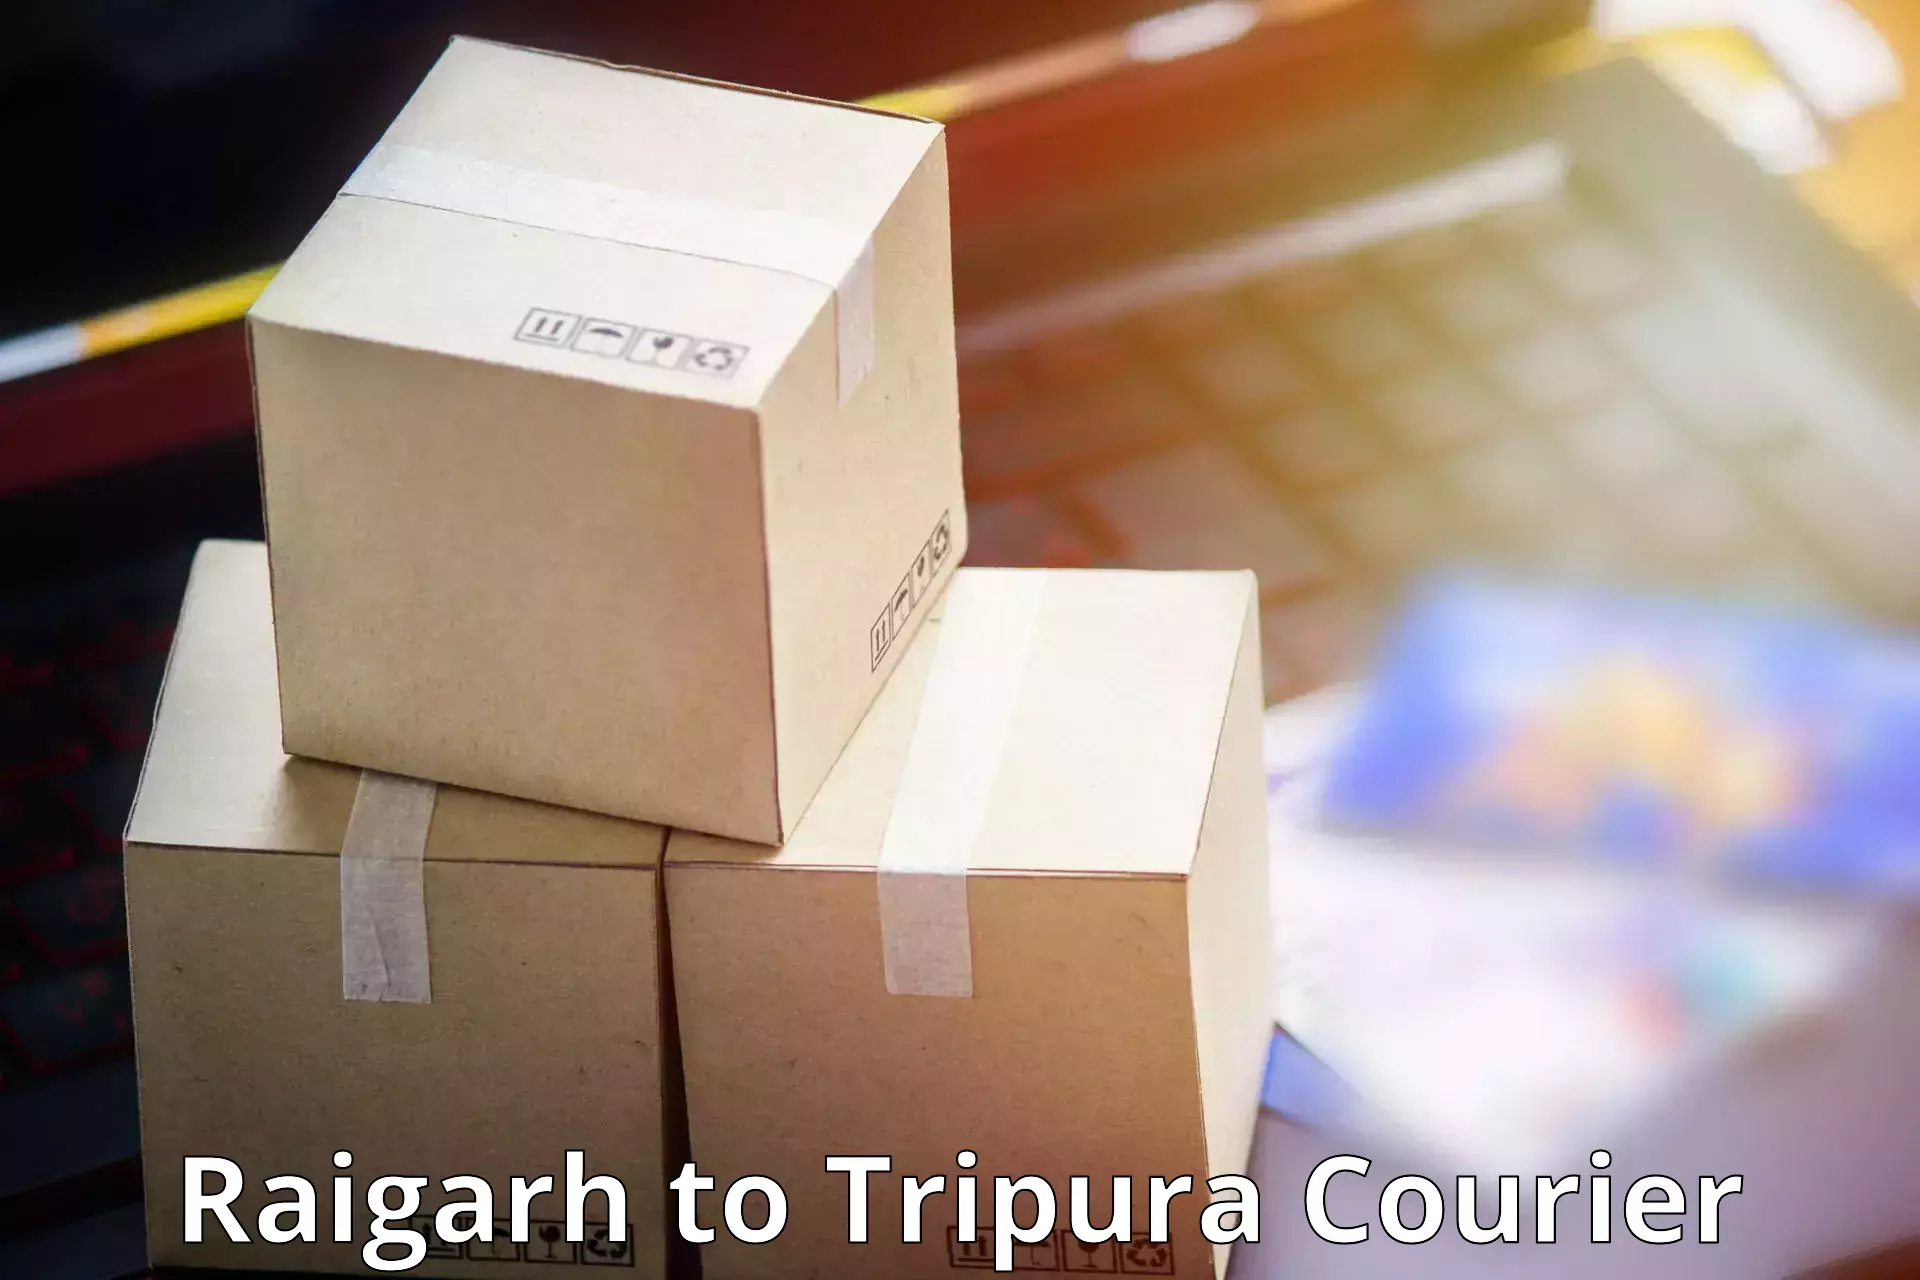 Holiday shipping services Raigarh to Udaipur Tripura